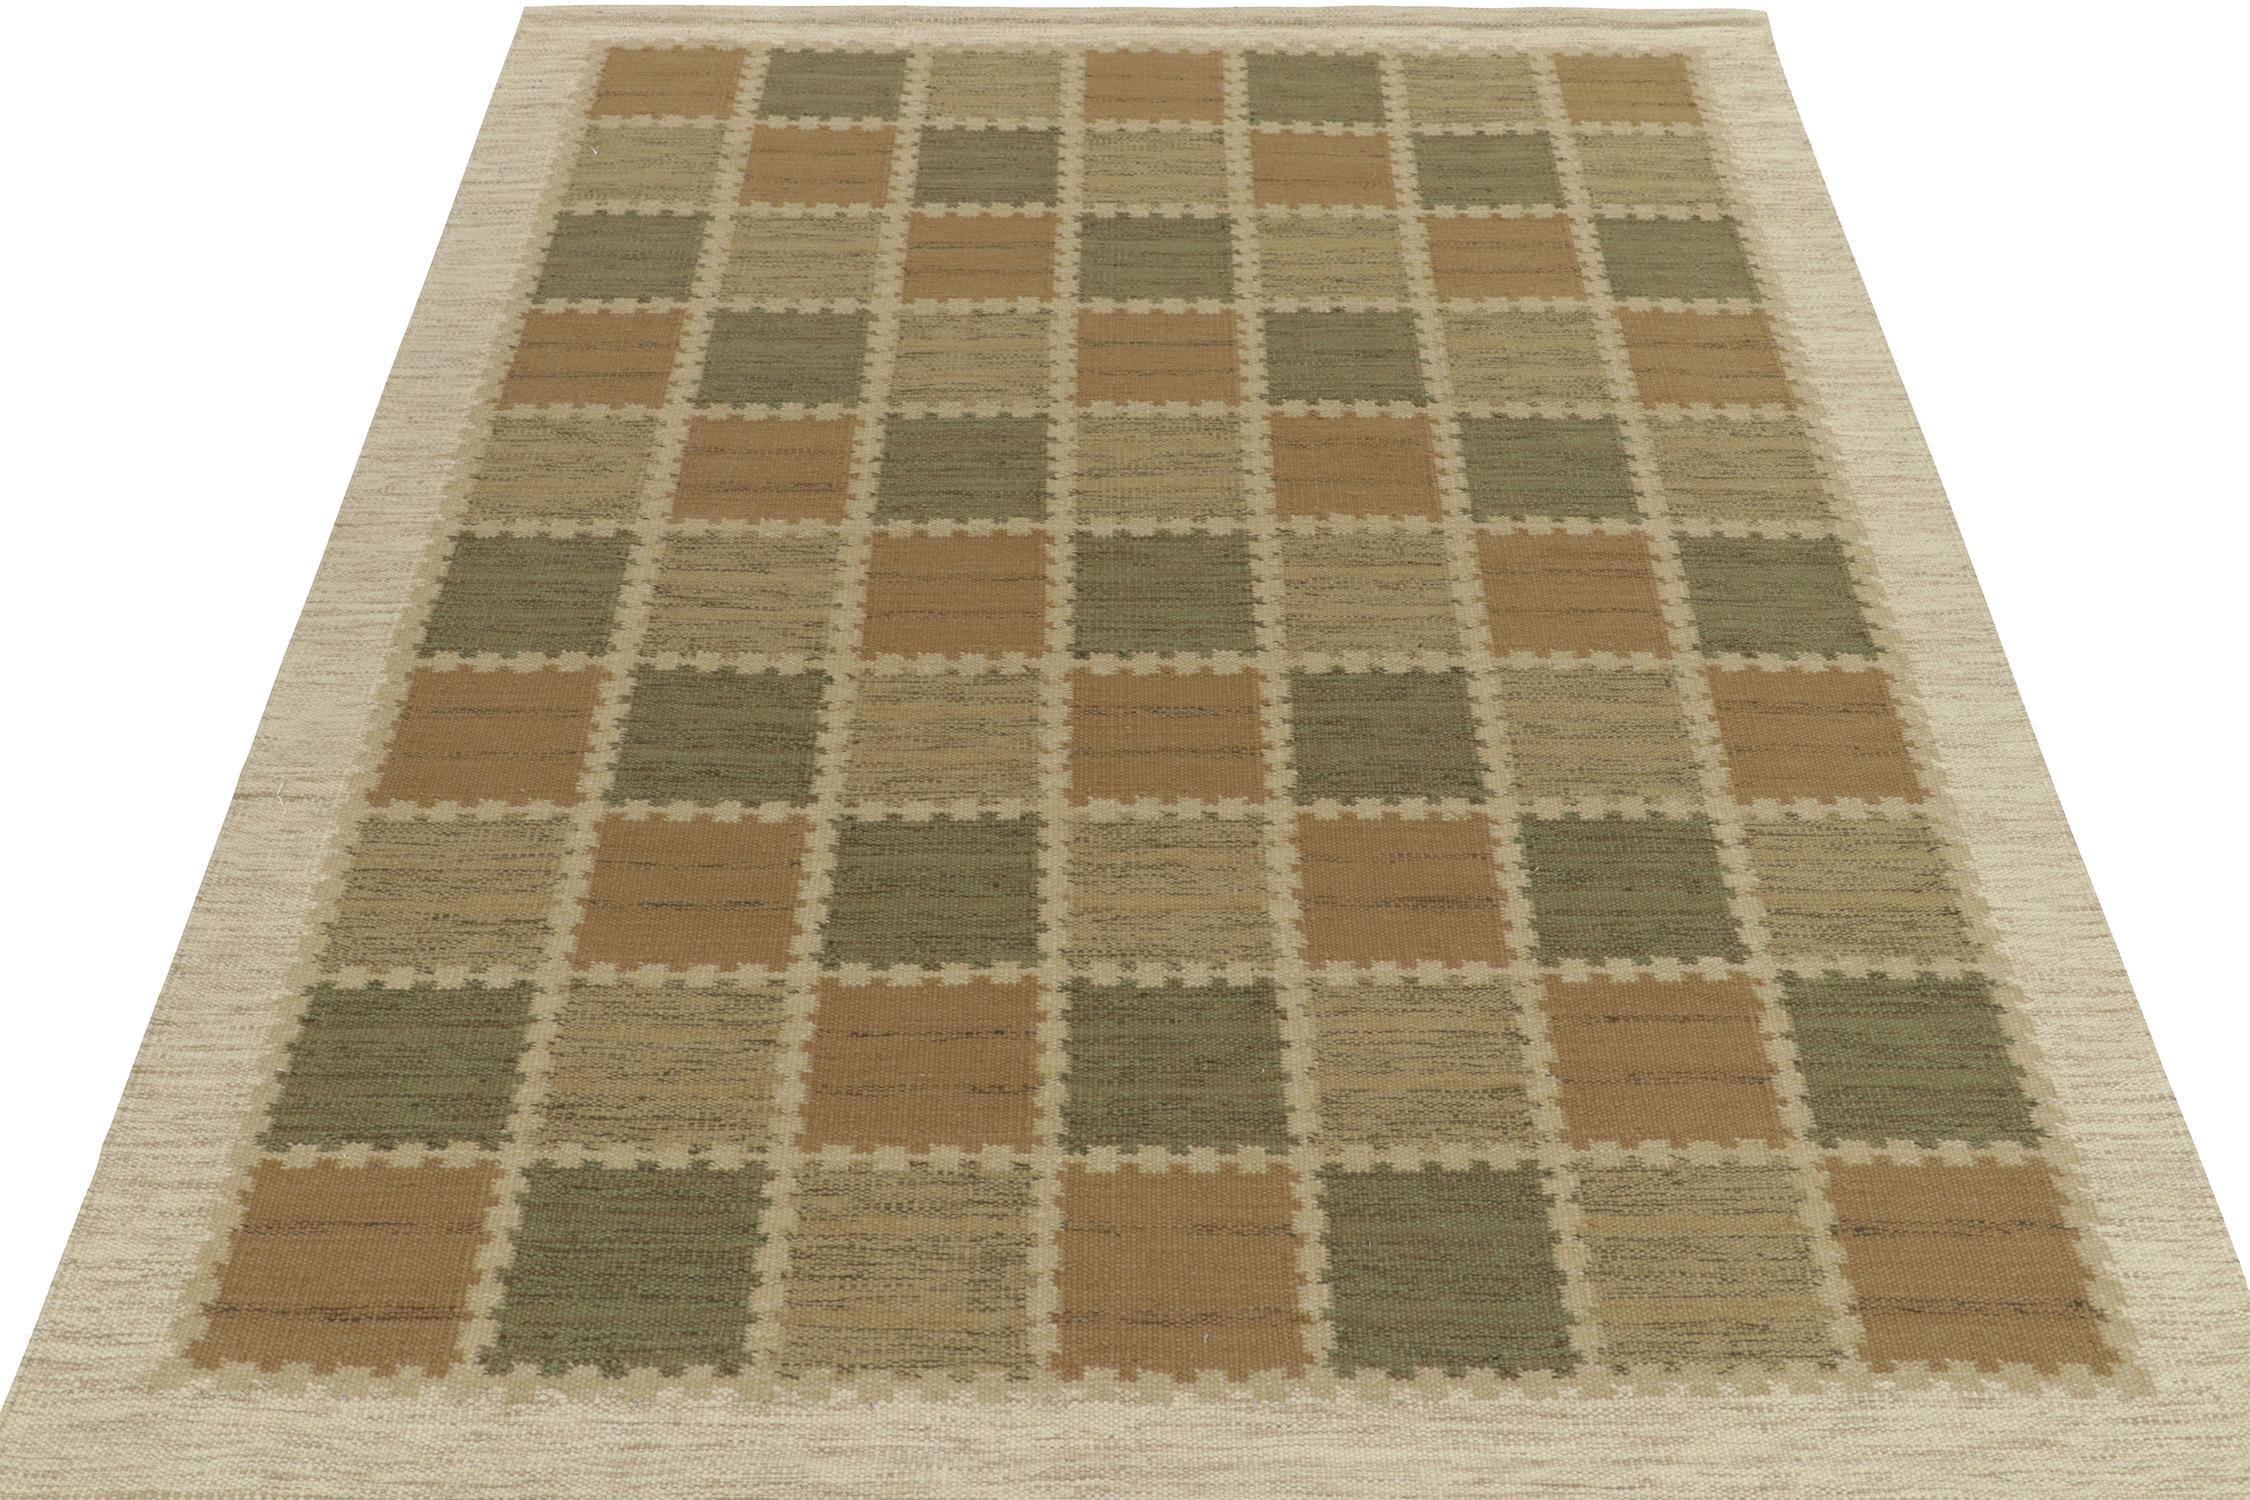 Exemplifying a modern take on Swedish Deco styles, a custom flat weave from Rug & Kilim’s award-winning Scandinavian Kilim collection. The handwoven area rug enjoys a smart application of geometry with well defined compartmentalisation entwining